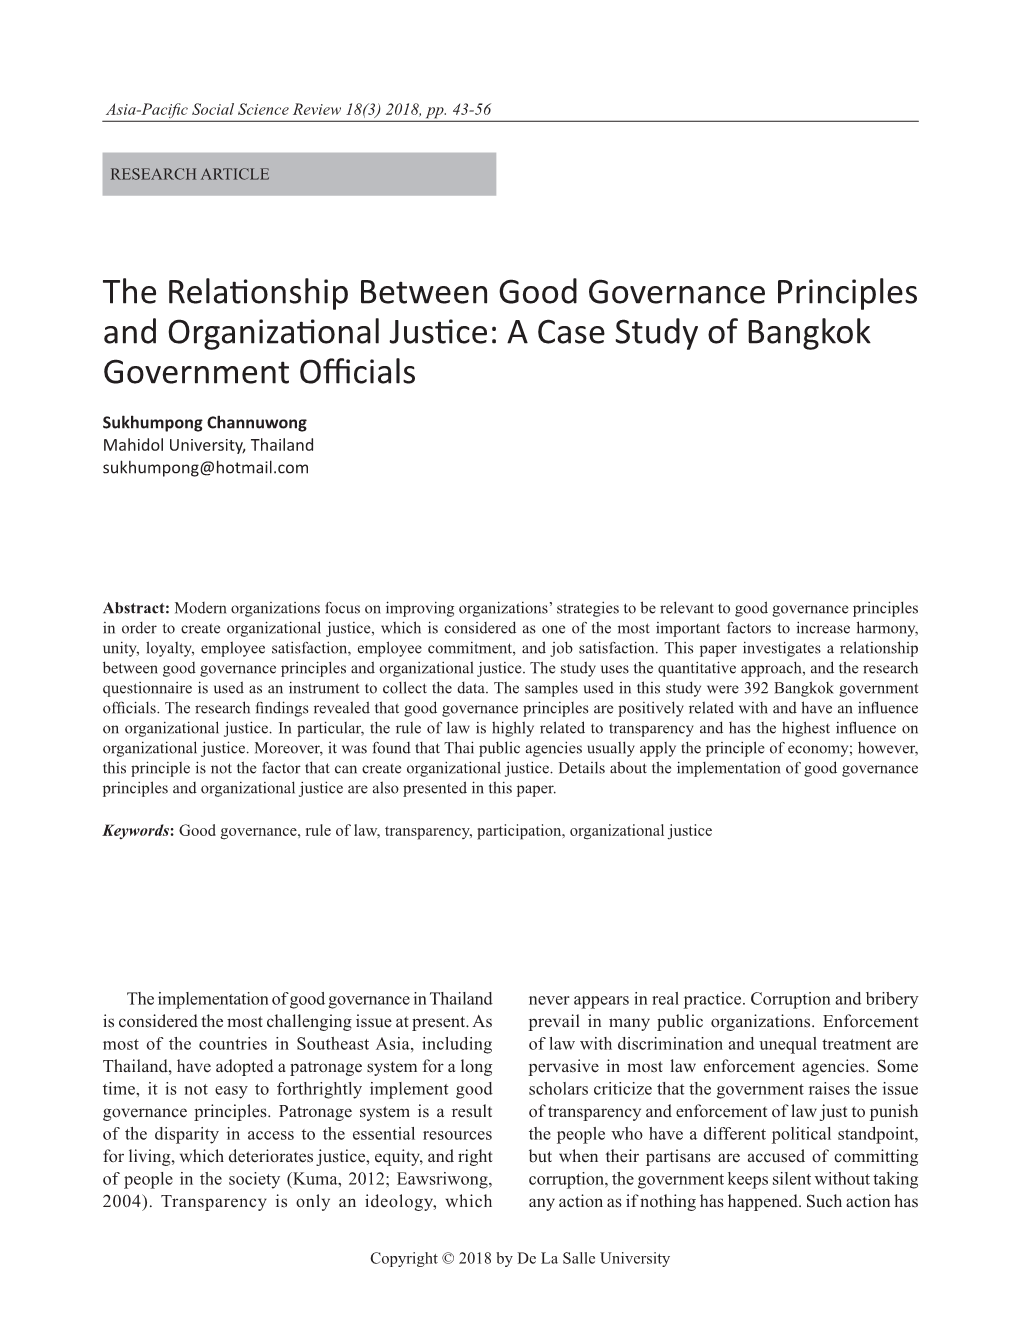 The Relationship Between Good Governance Principles and Organizational Justice: a Case Study of Bangkok Government Officials